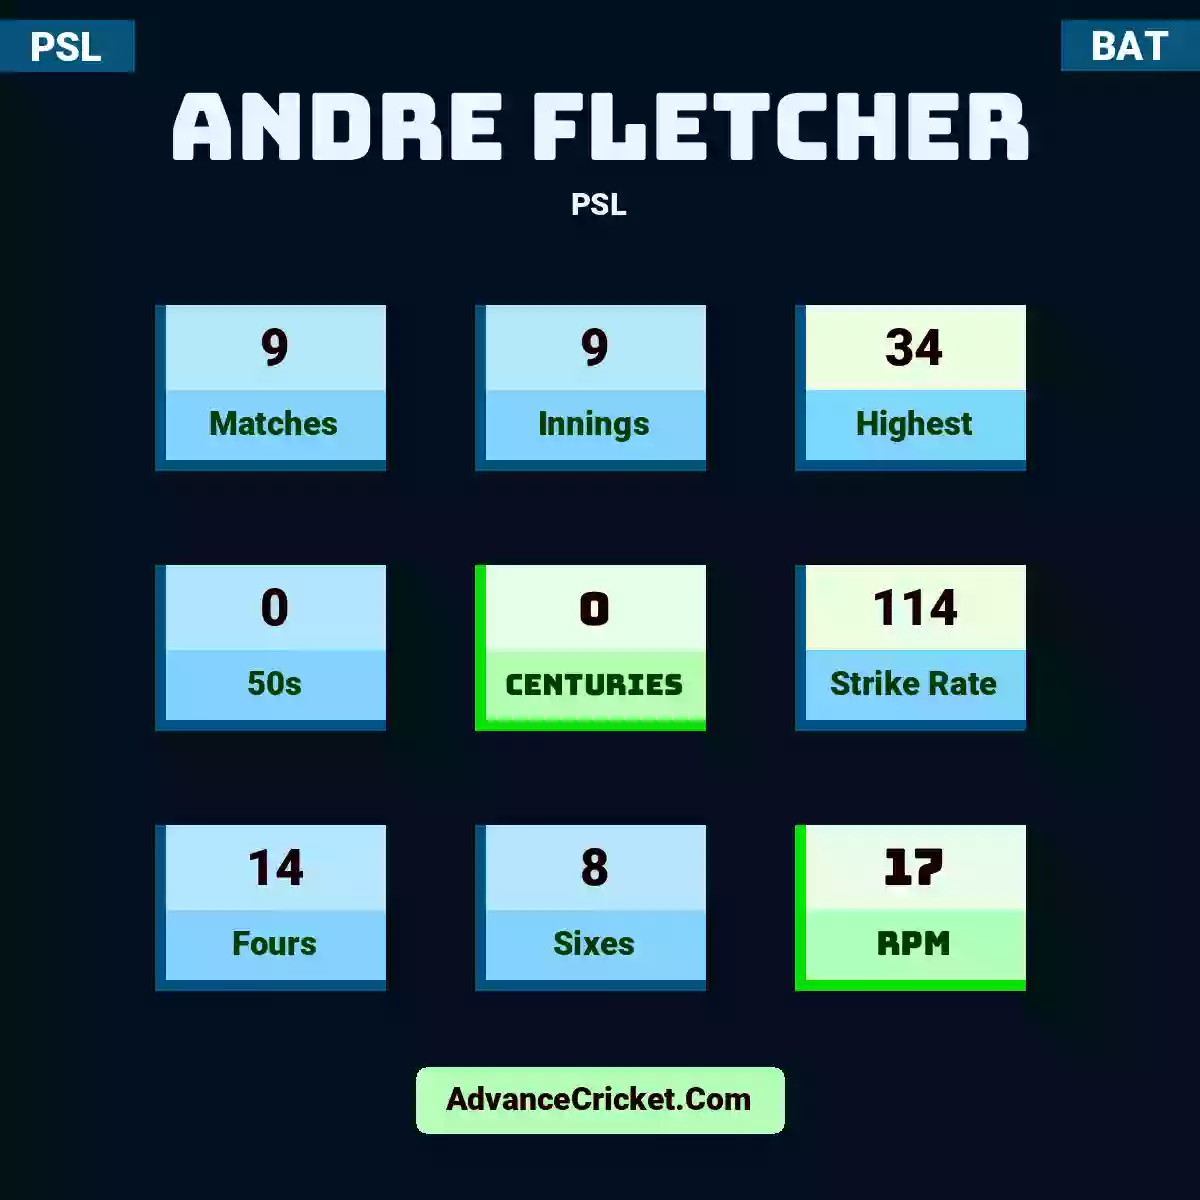 Andre Fletcher PSL , Andre Fletcher played 9 matches, scored 34 runs as highest, 0 half-centuries, and 0 centuries, with a strike rate of 114. A.Fletcher hit 14 fours and 8 sixes, with an RPM of 17.